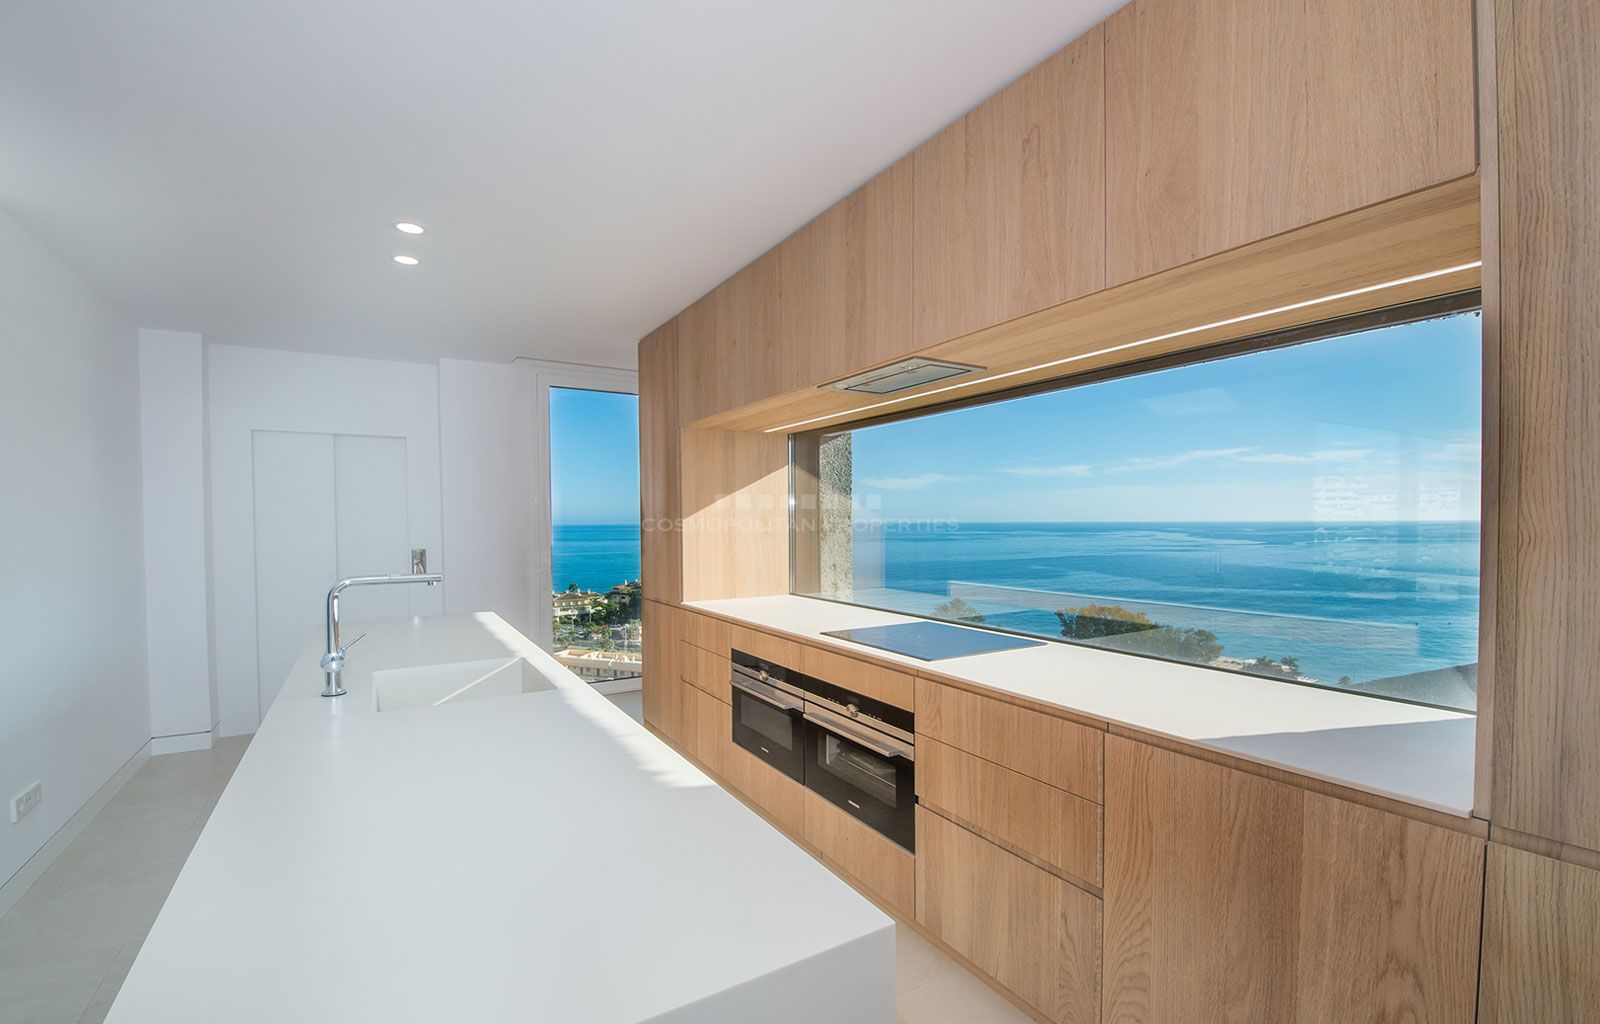 Modern apartments with fabulous sea views right by the beach!